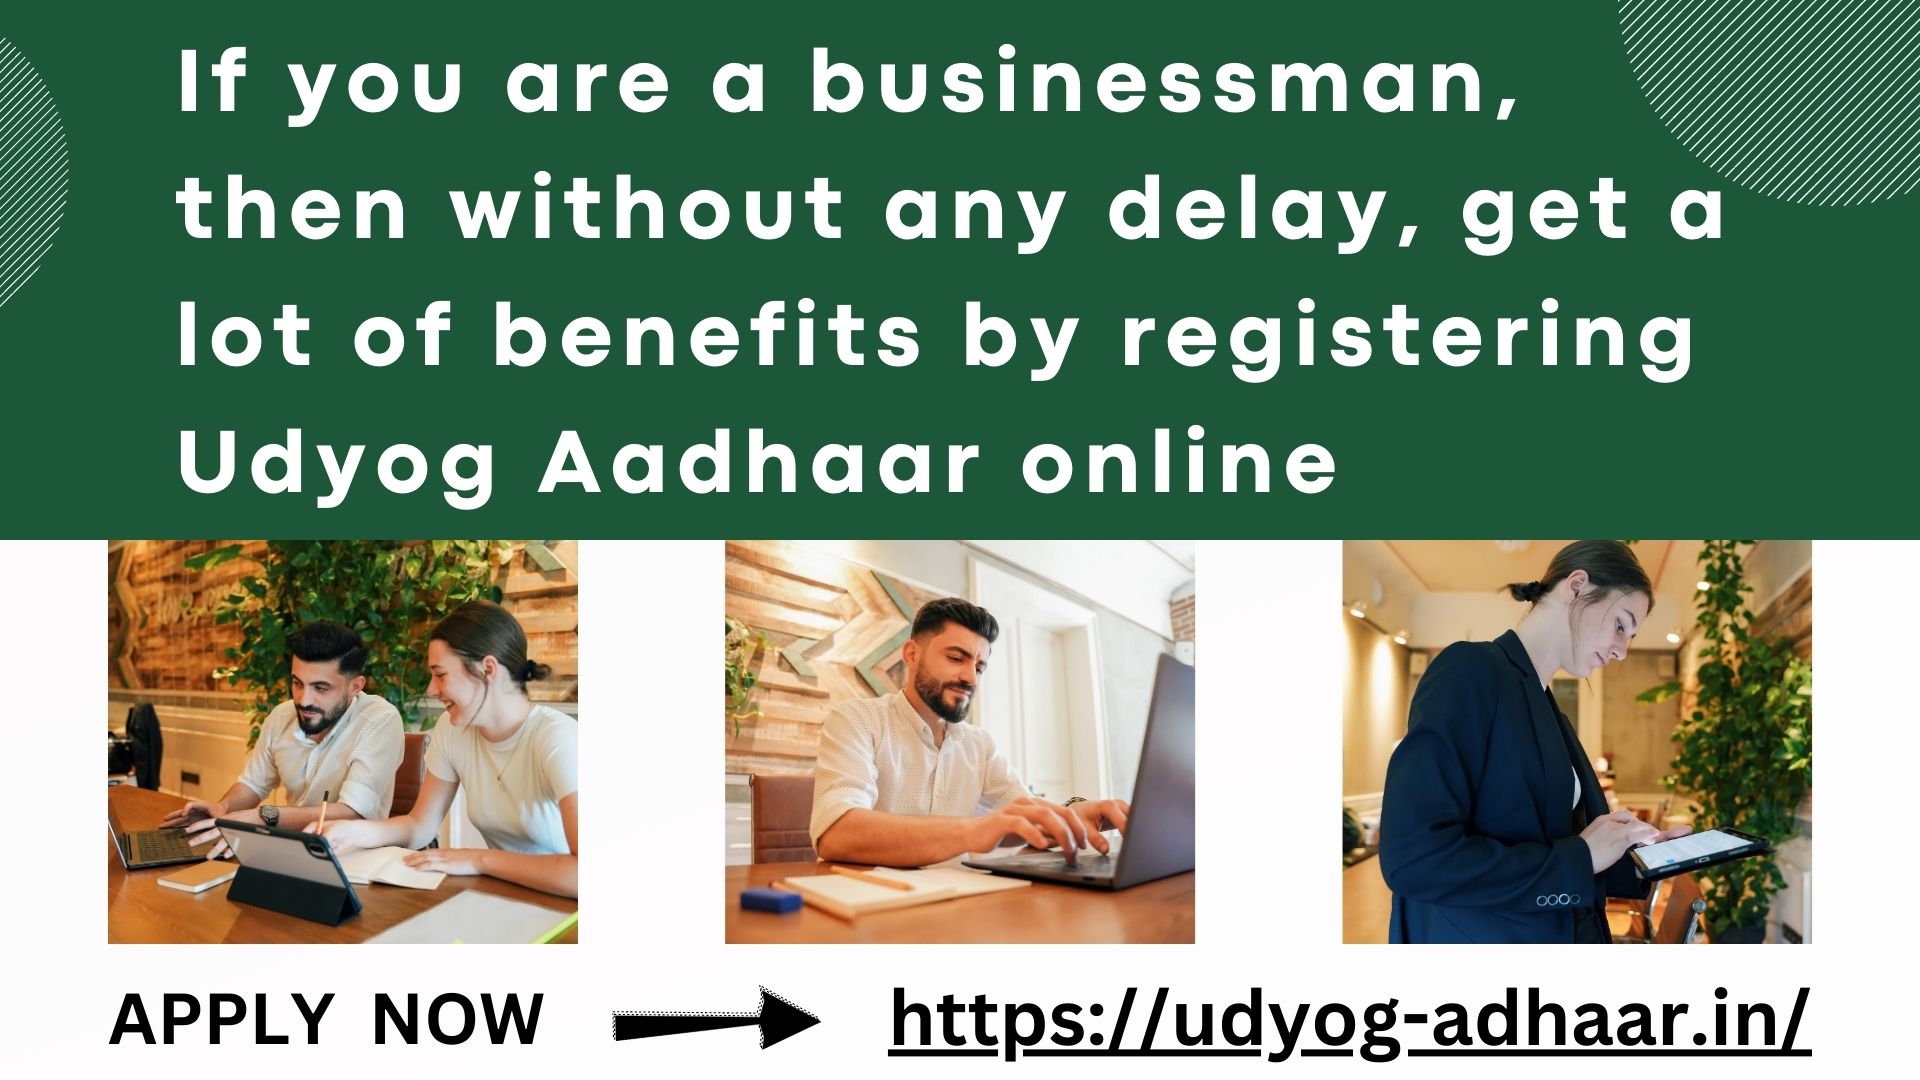 If you are a businessman, then without any delay, get a lot of benefits by registering Udyog Aadhaar online